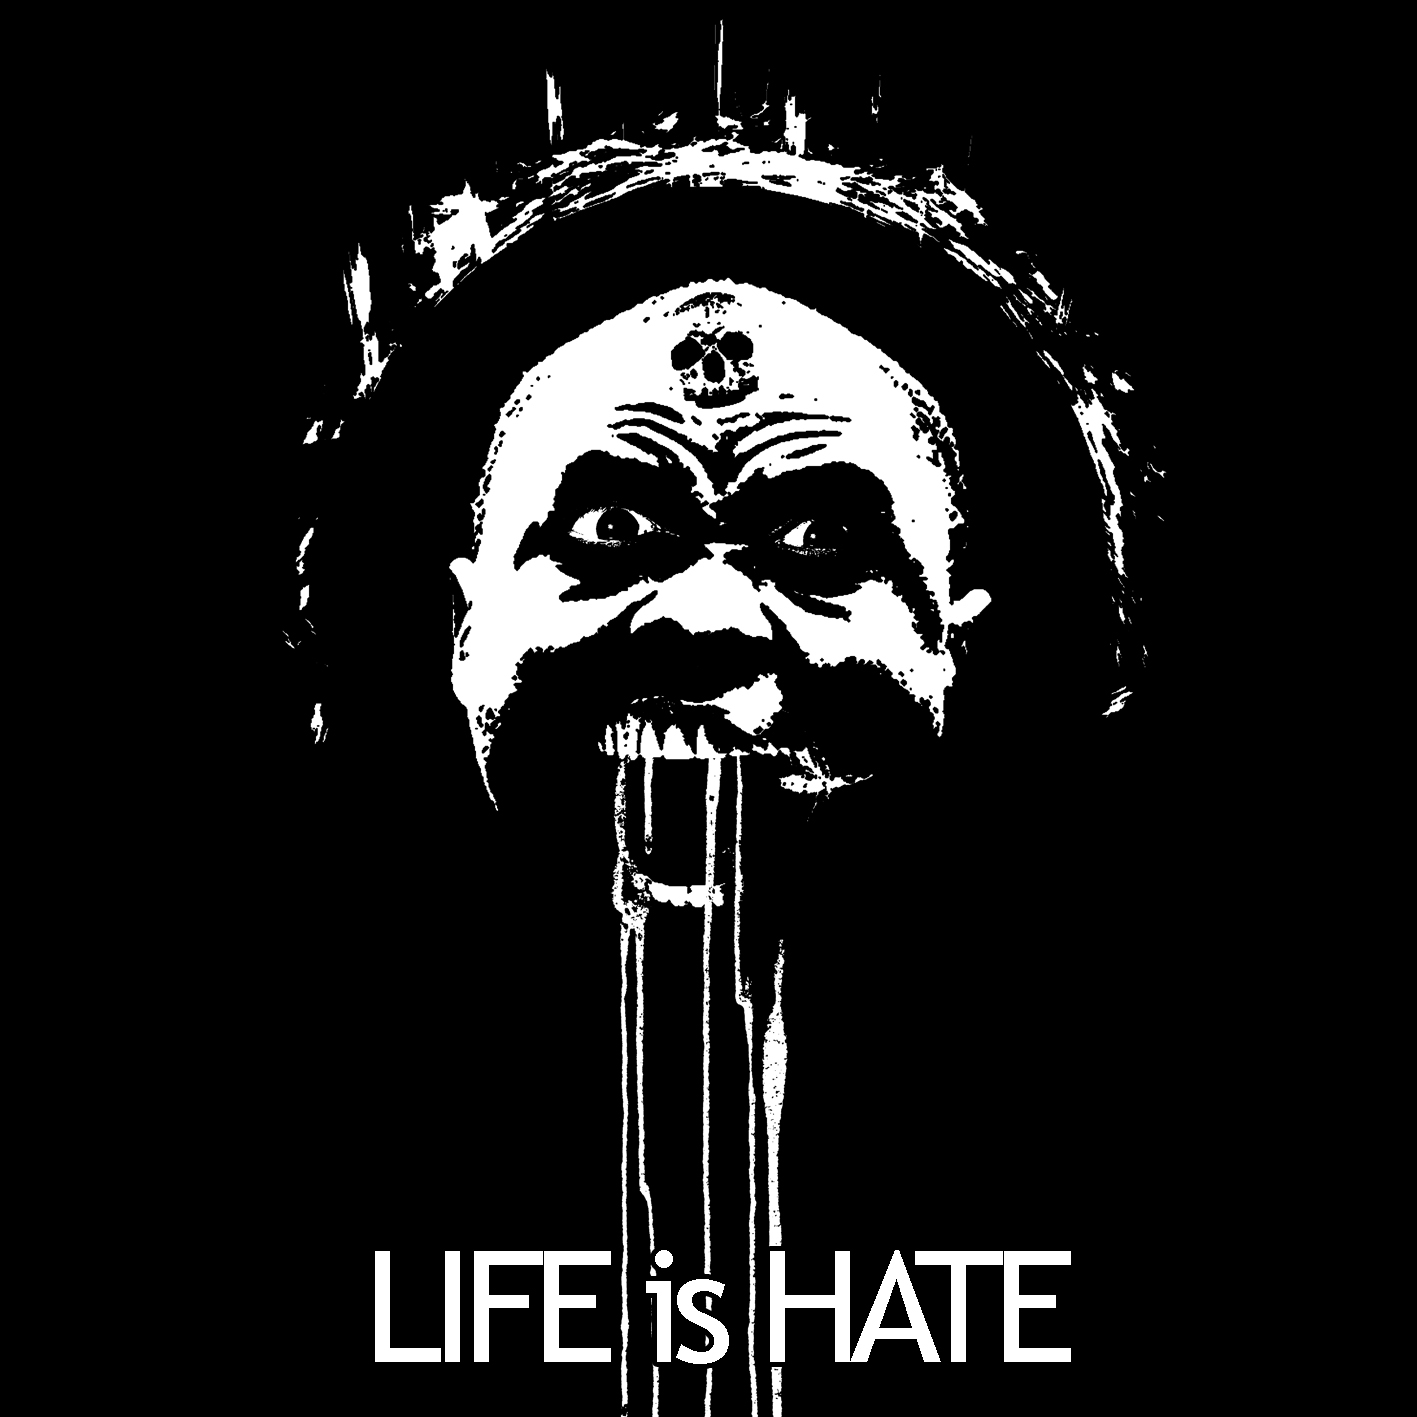 Life hates me. Hate Life. Discharge State violence State Control. Hate картинка.